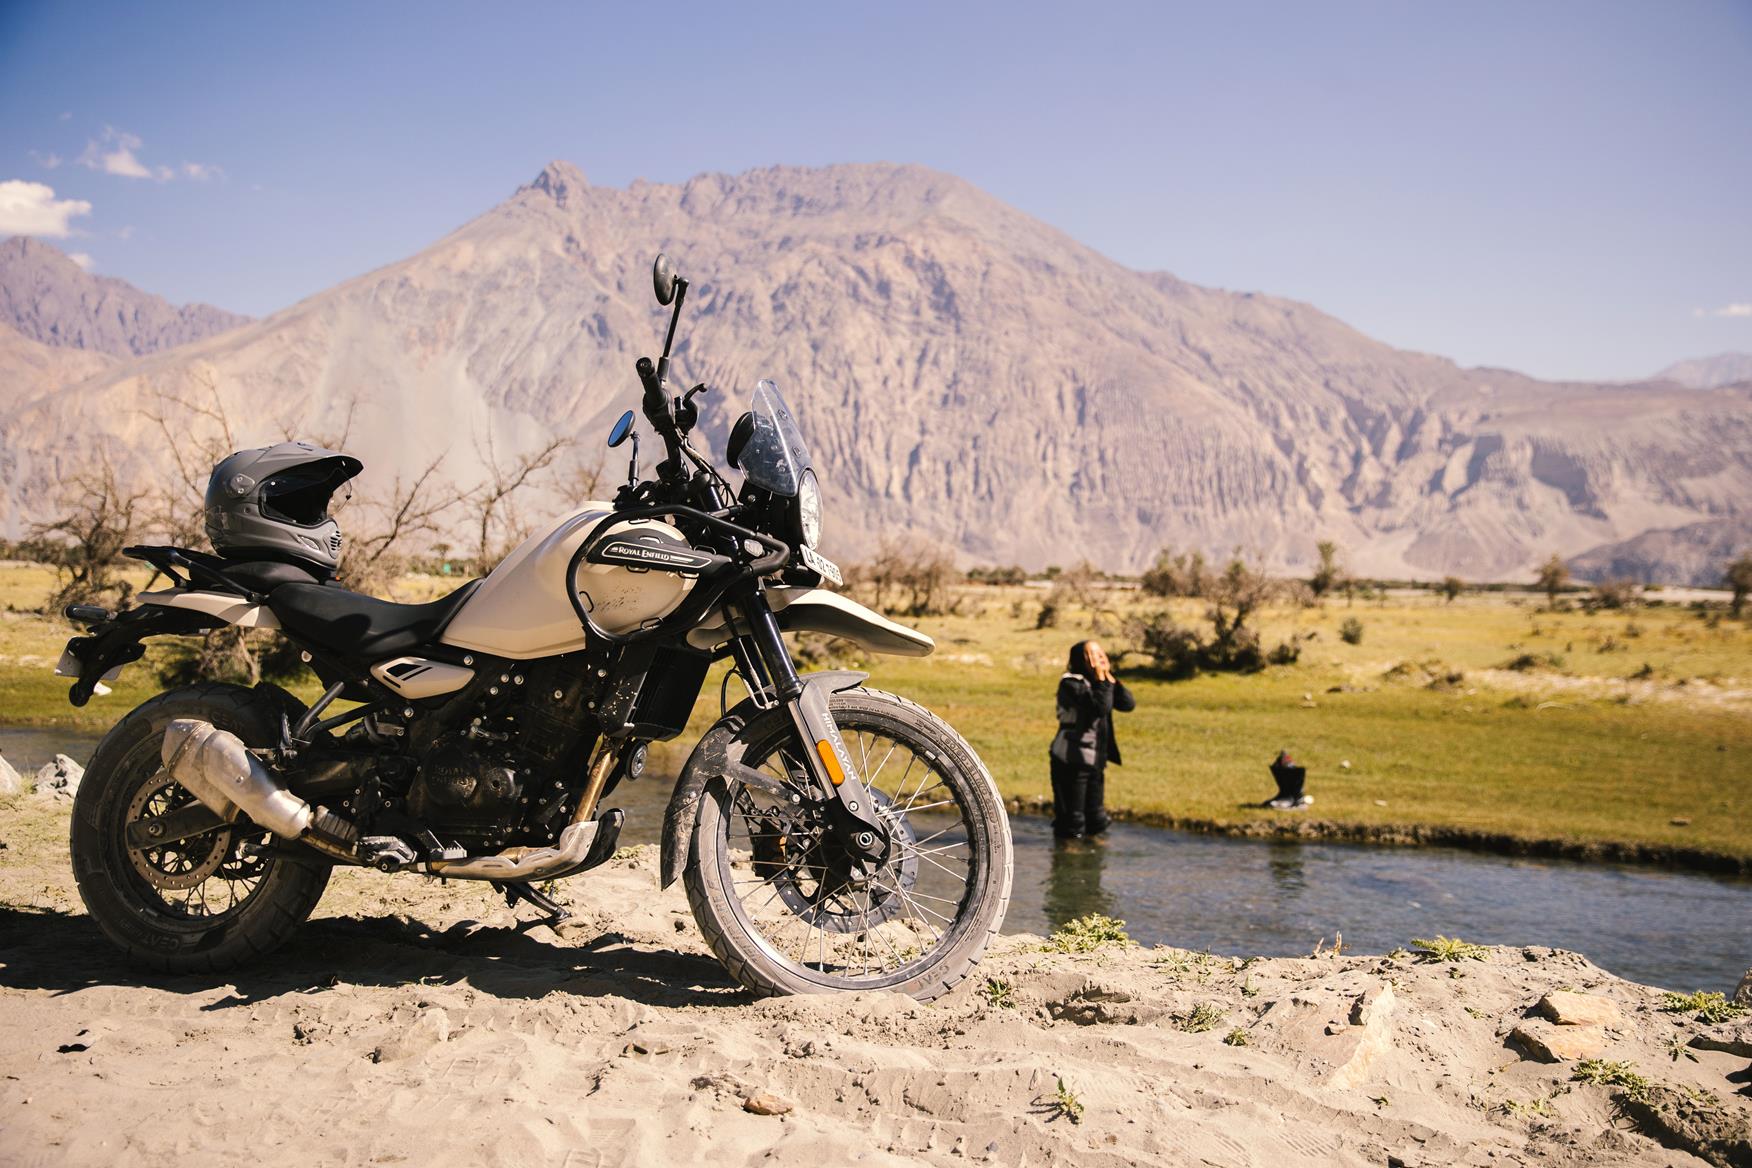 Second-gen Royal Enfield Himalayan 450 is here